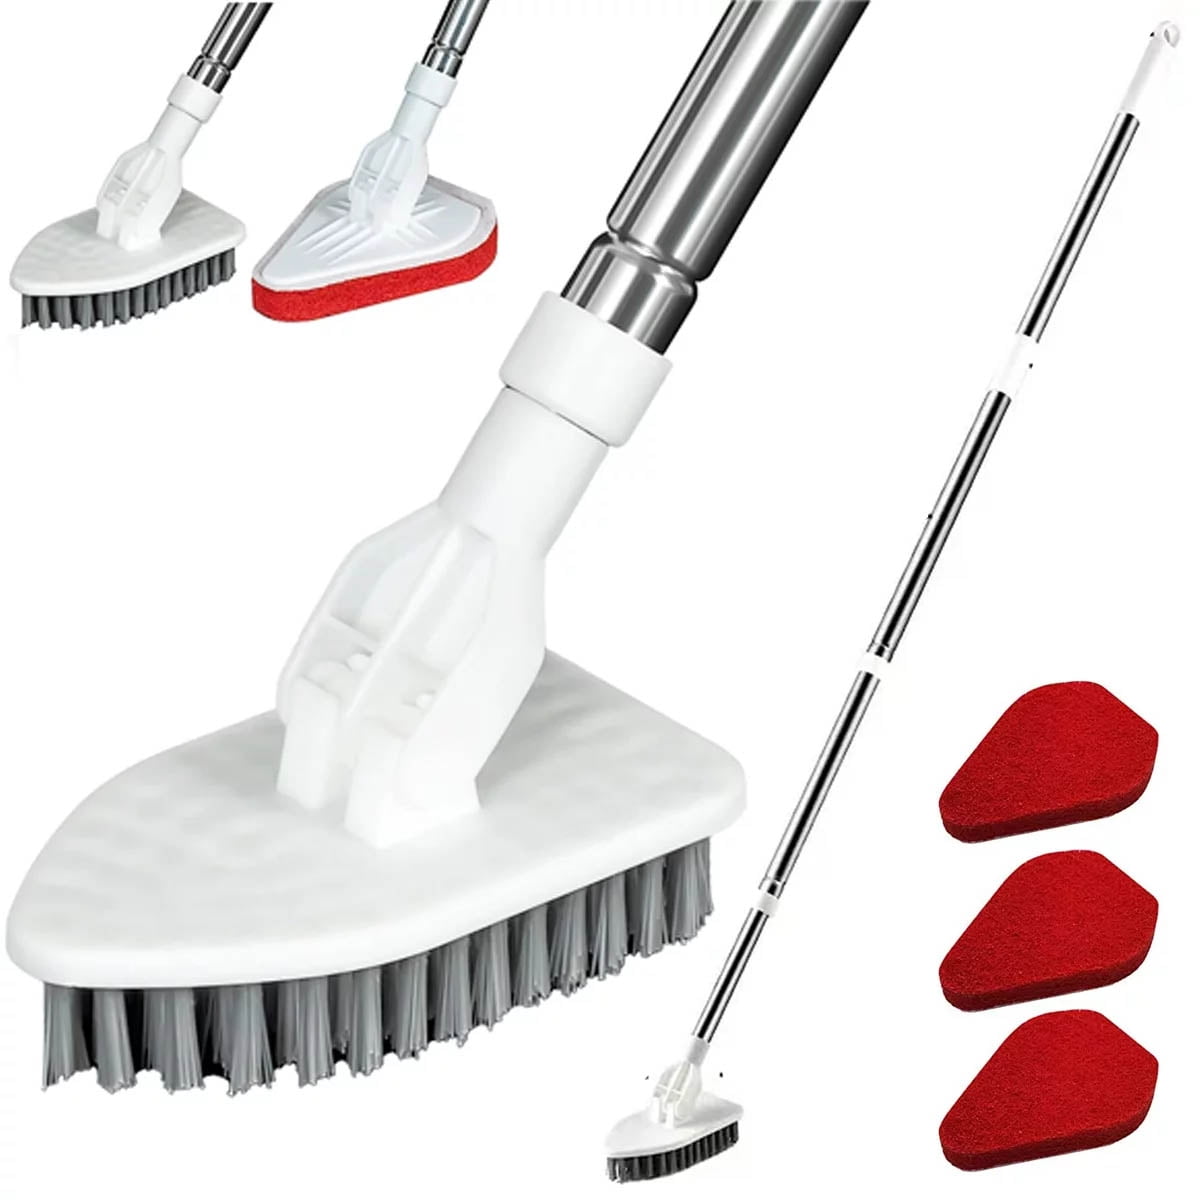 Clorox Multi-Purpose Flex Scrub Cleaning Brush with Removable Handle 